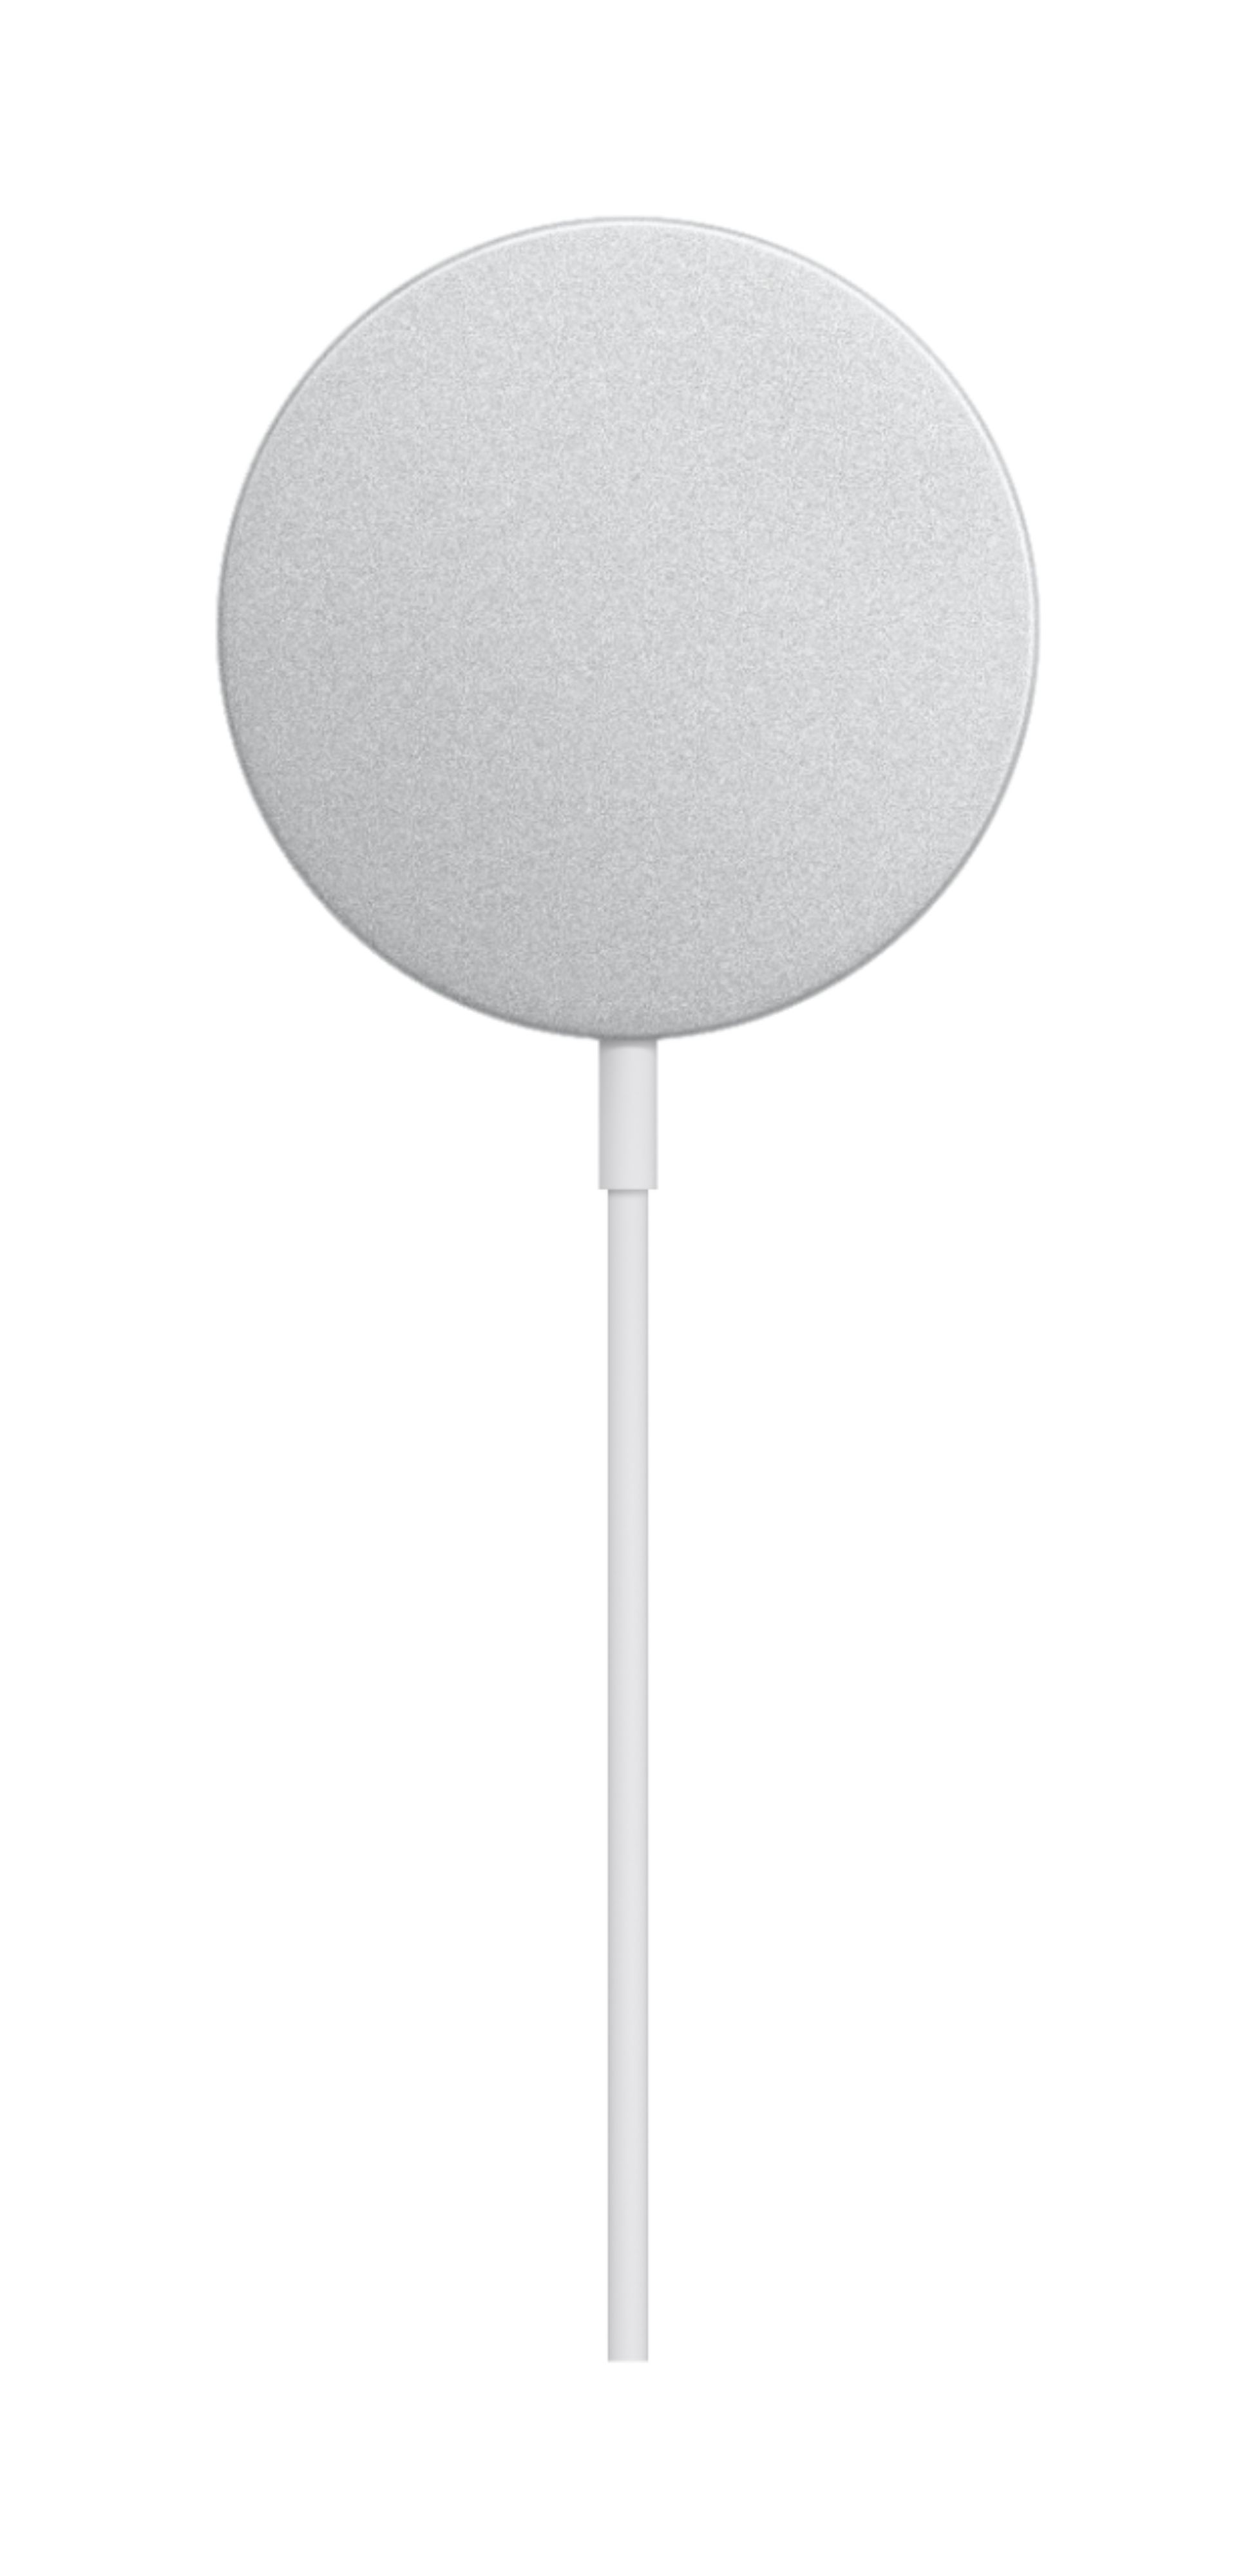 Apple - MagSafe iPhone Charger - White $33